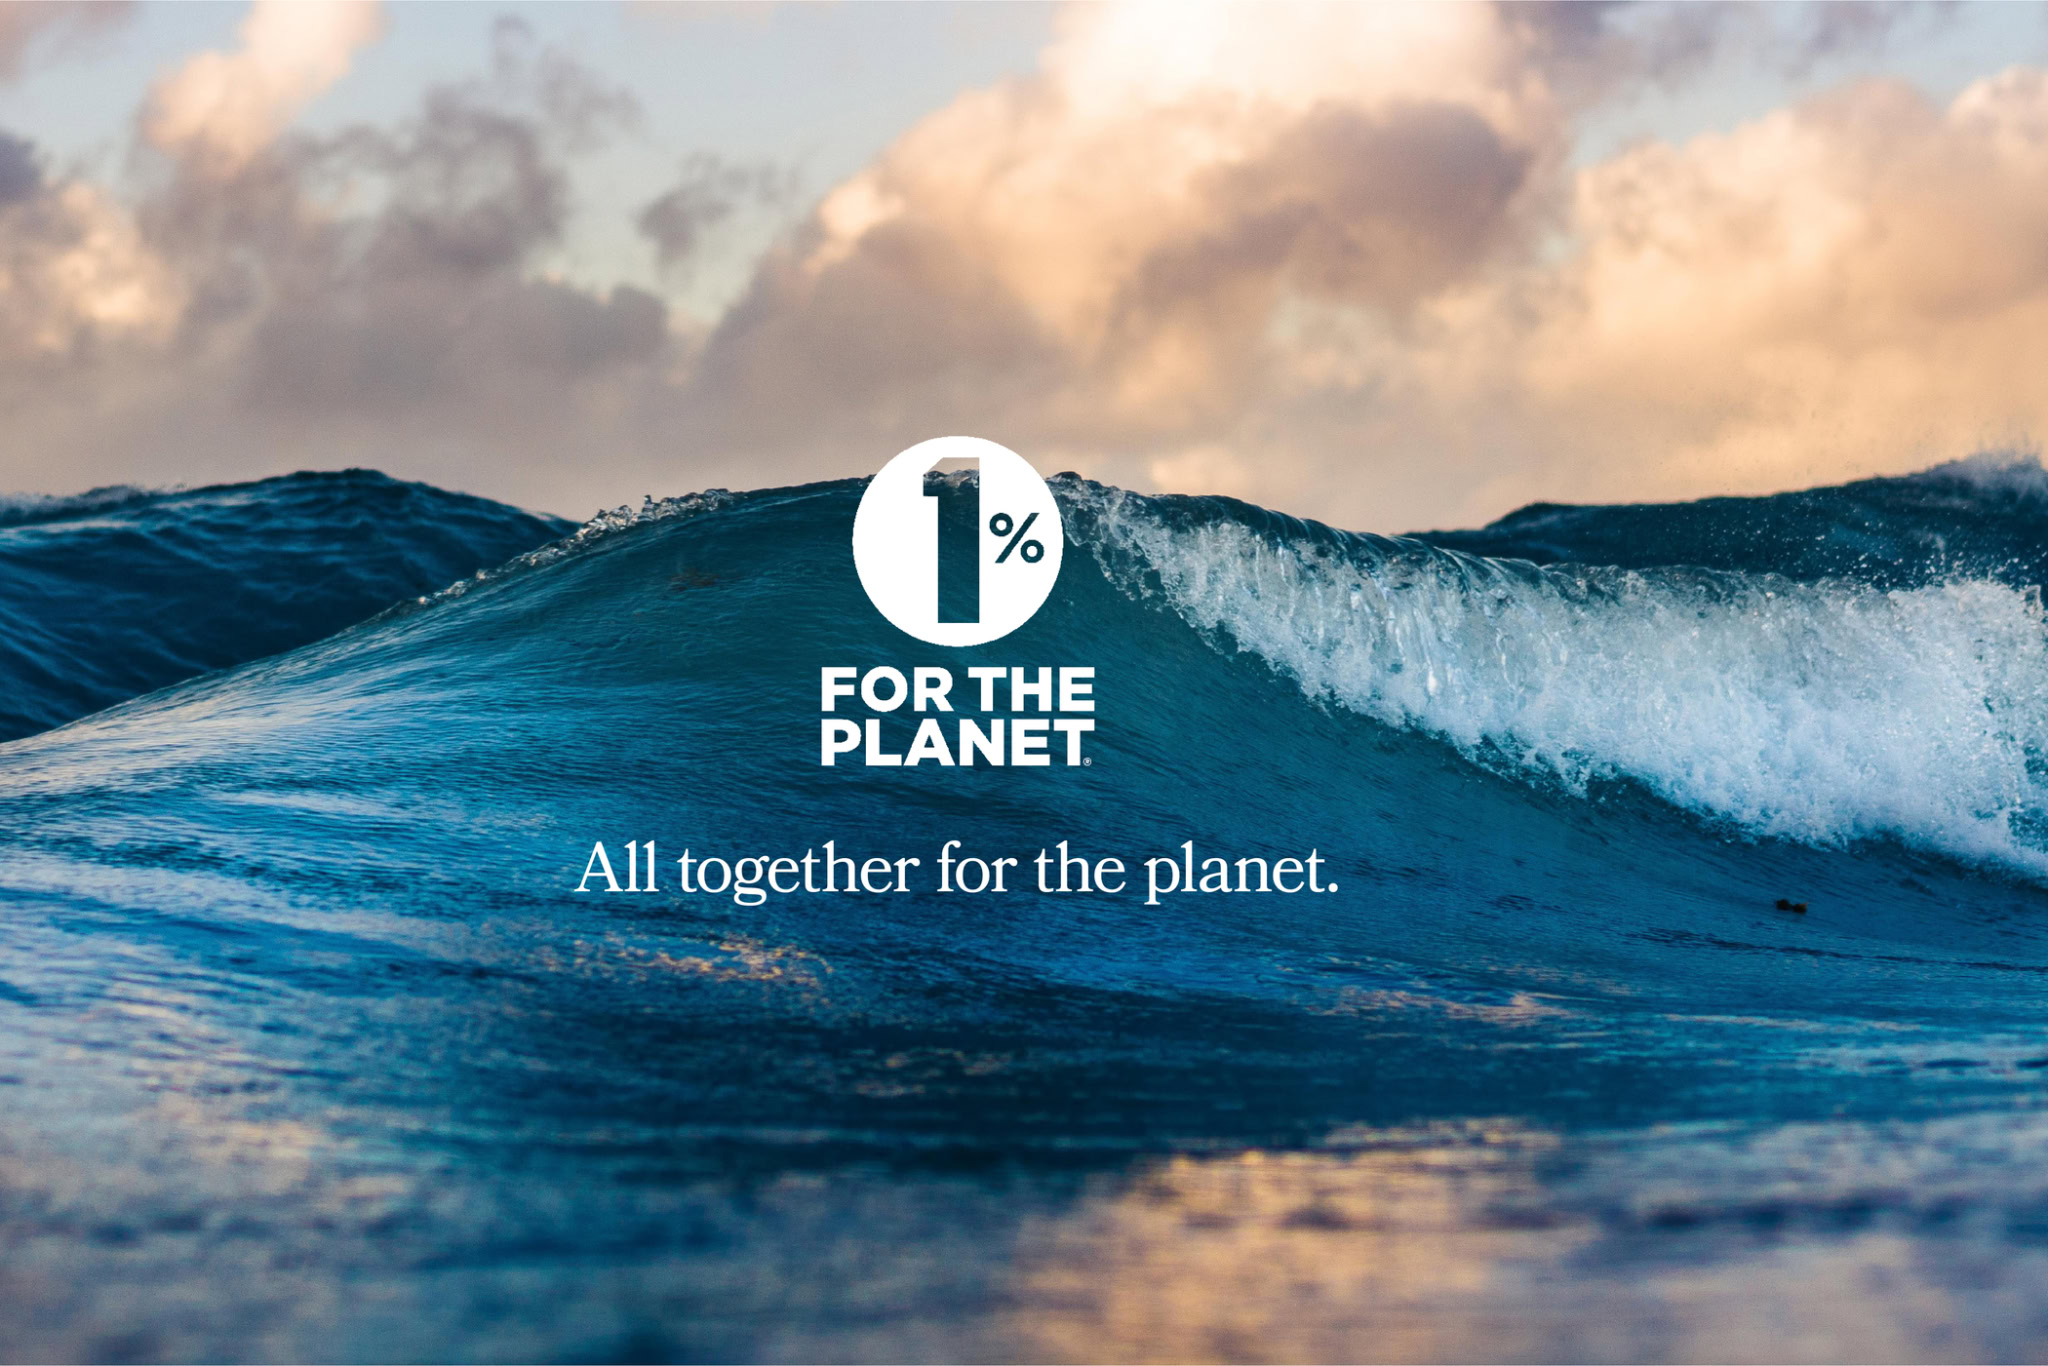 1 percent for planet logo with copy reading "all together for the planet". Background is rolling ocean waves.